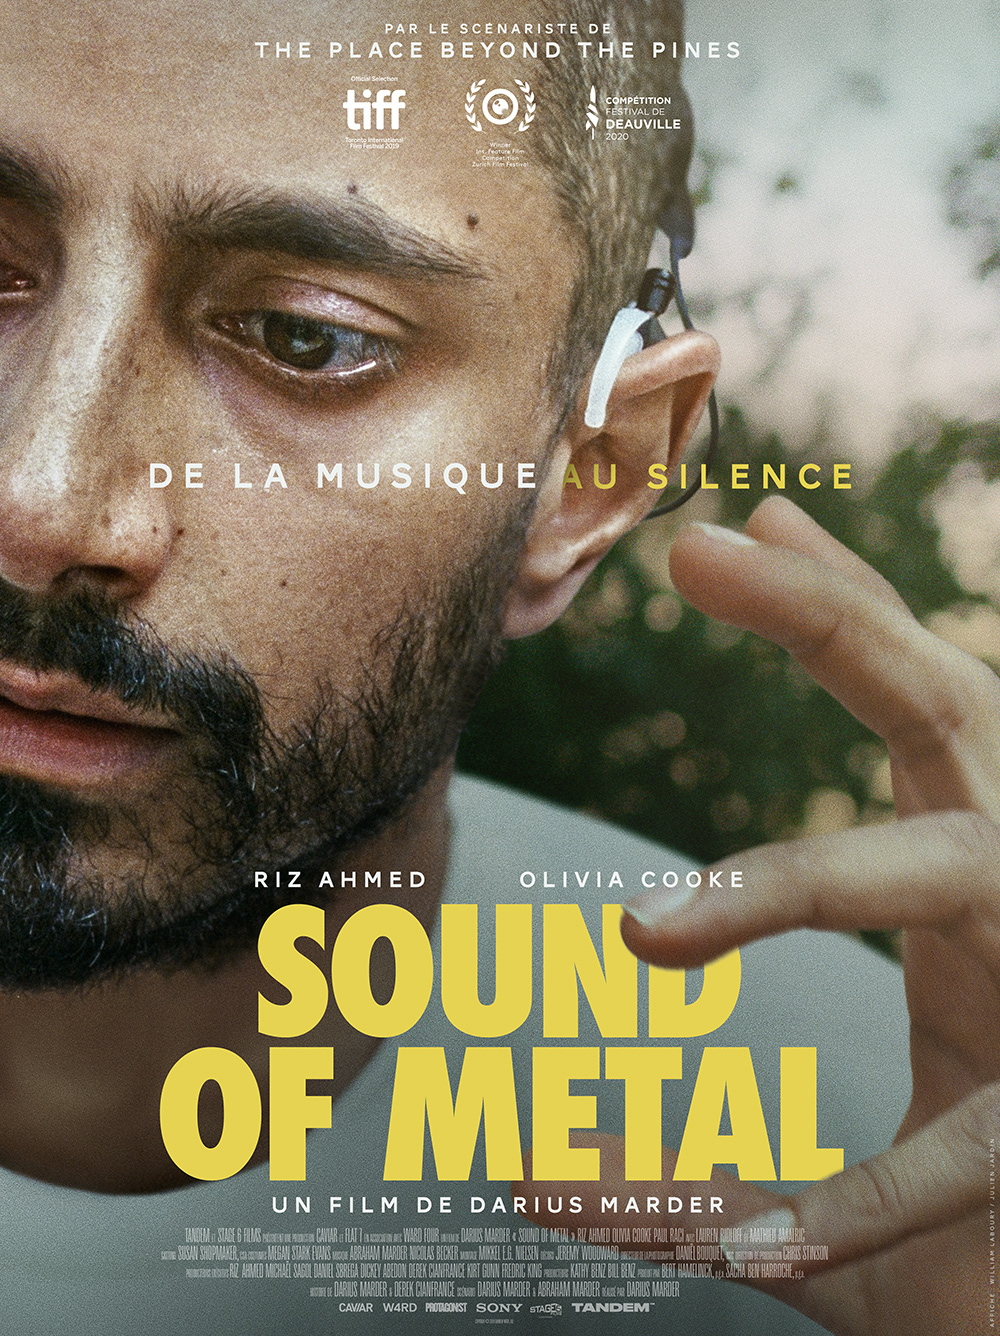 william laboury - POSTER • Sound of metal